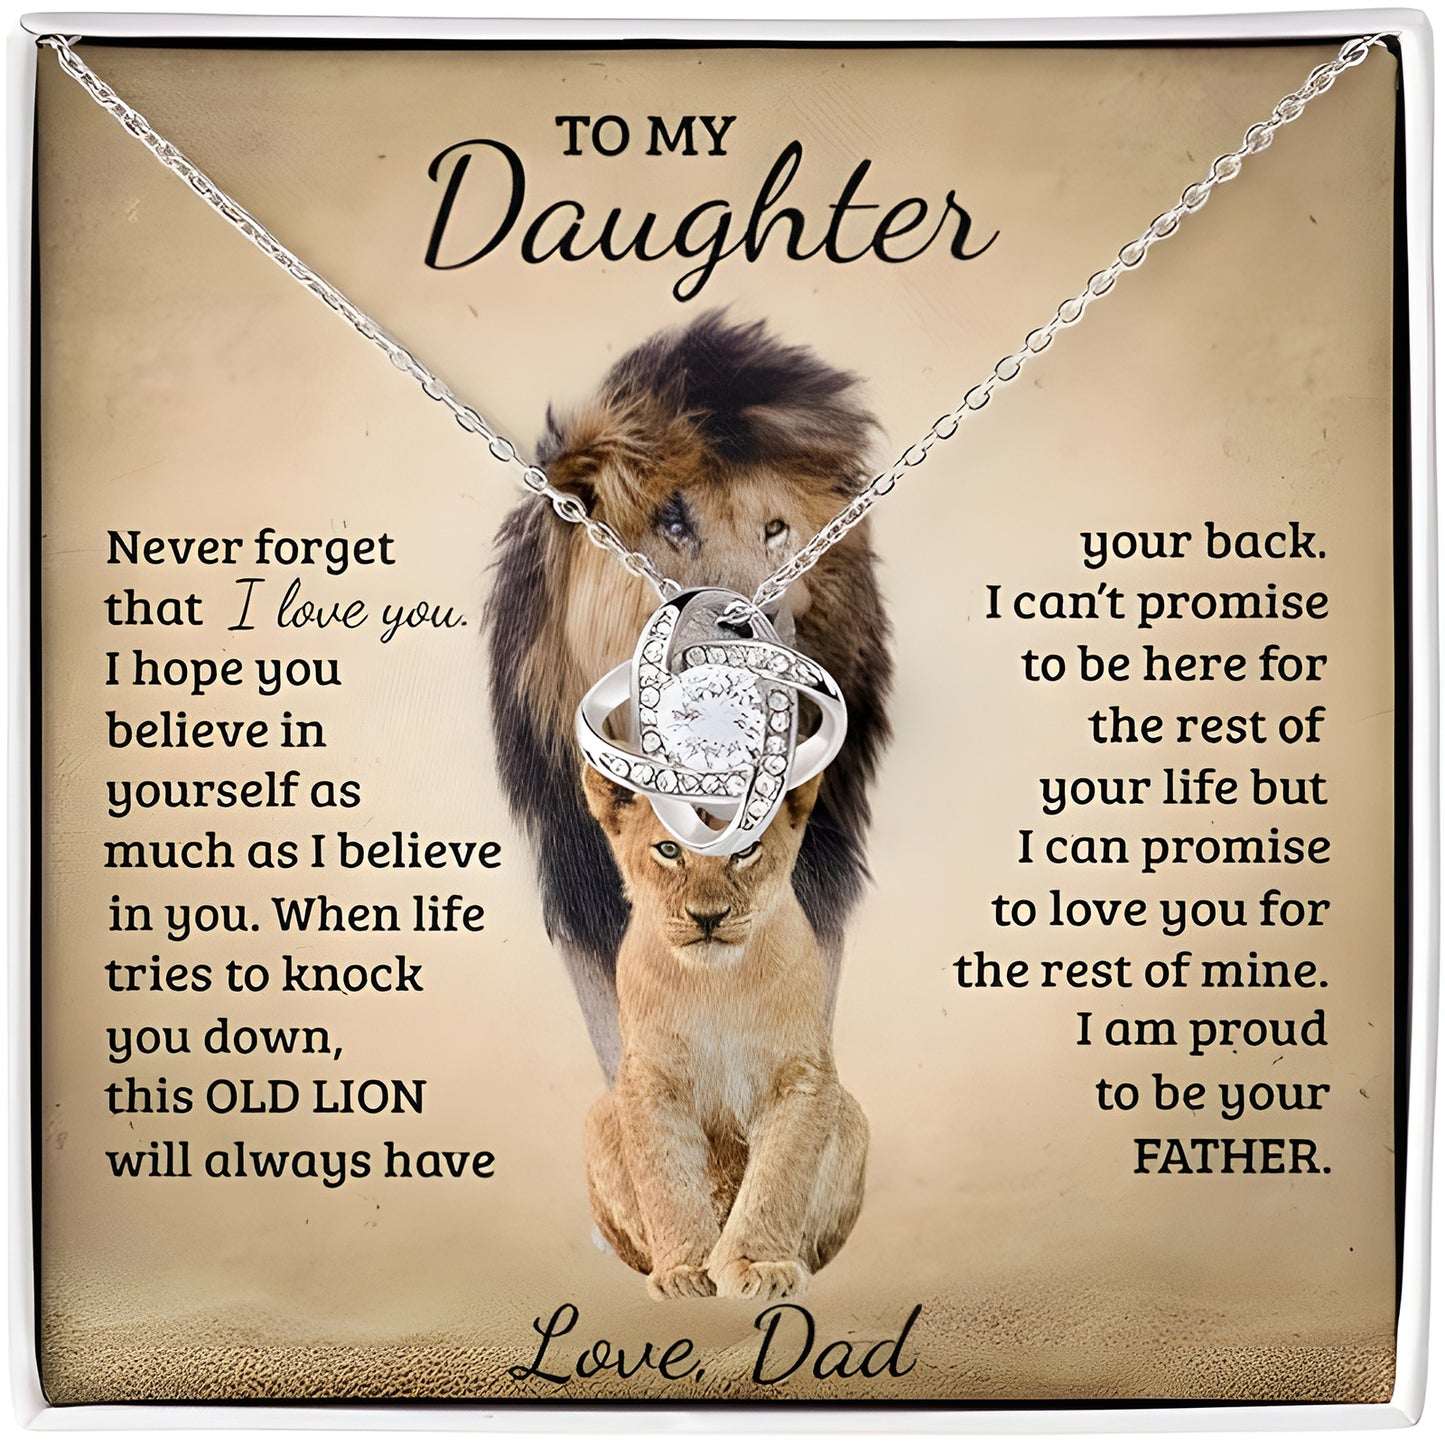 Family - Gifts For Daughter From Dad - Personalized Necklace